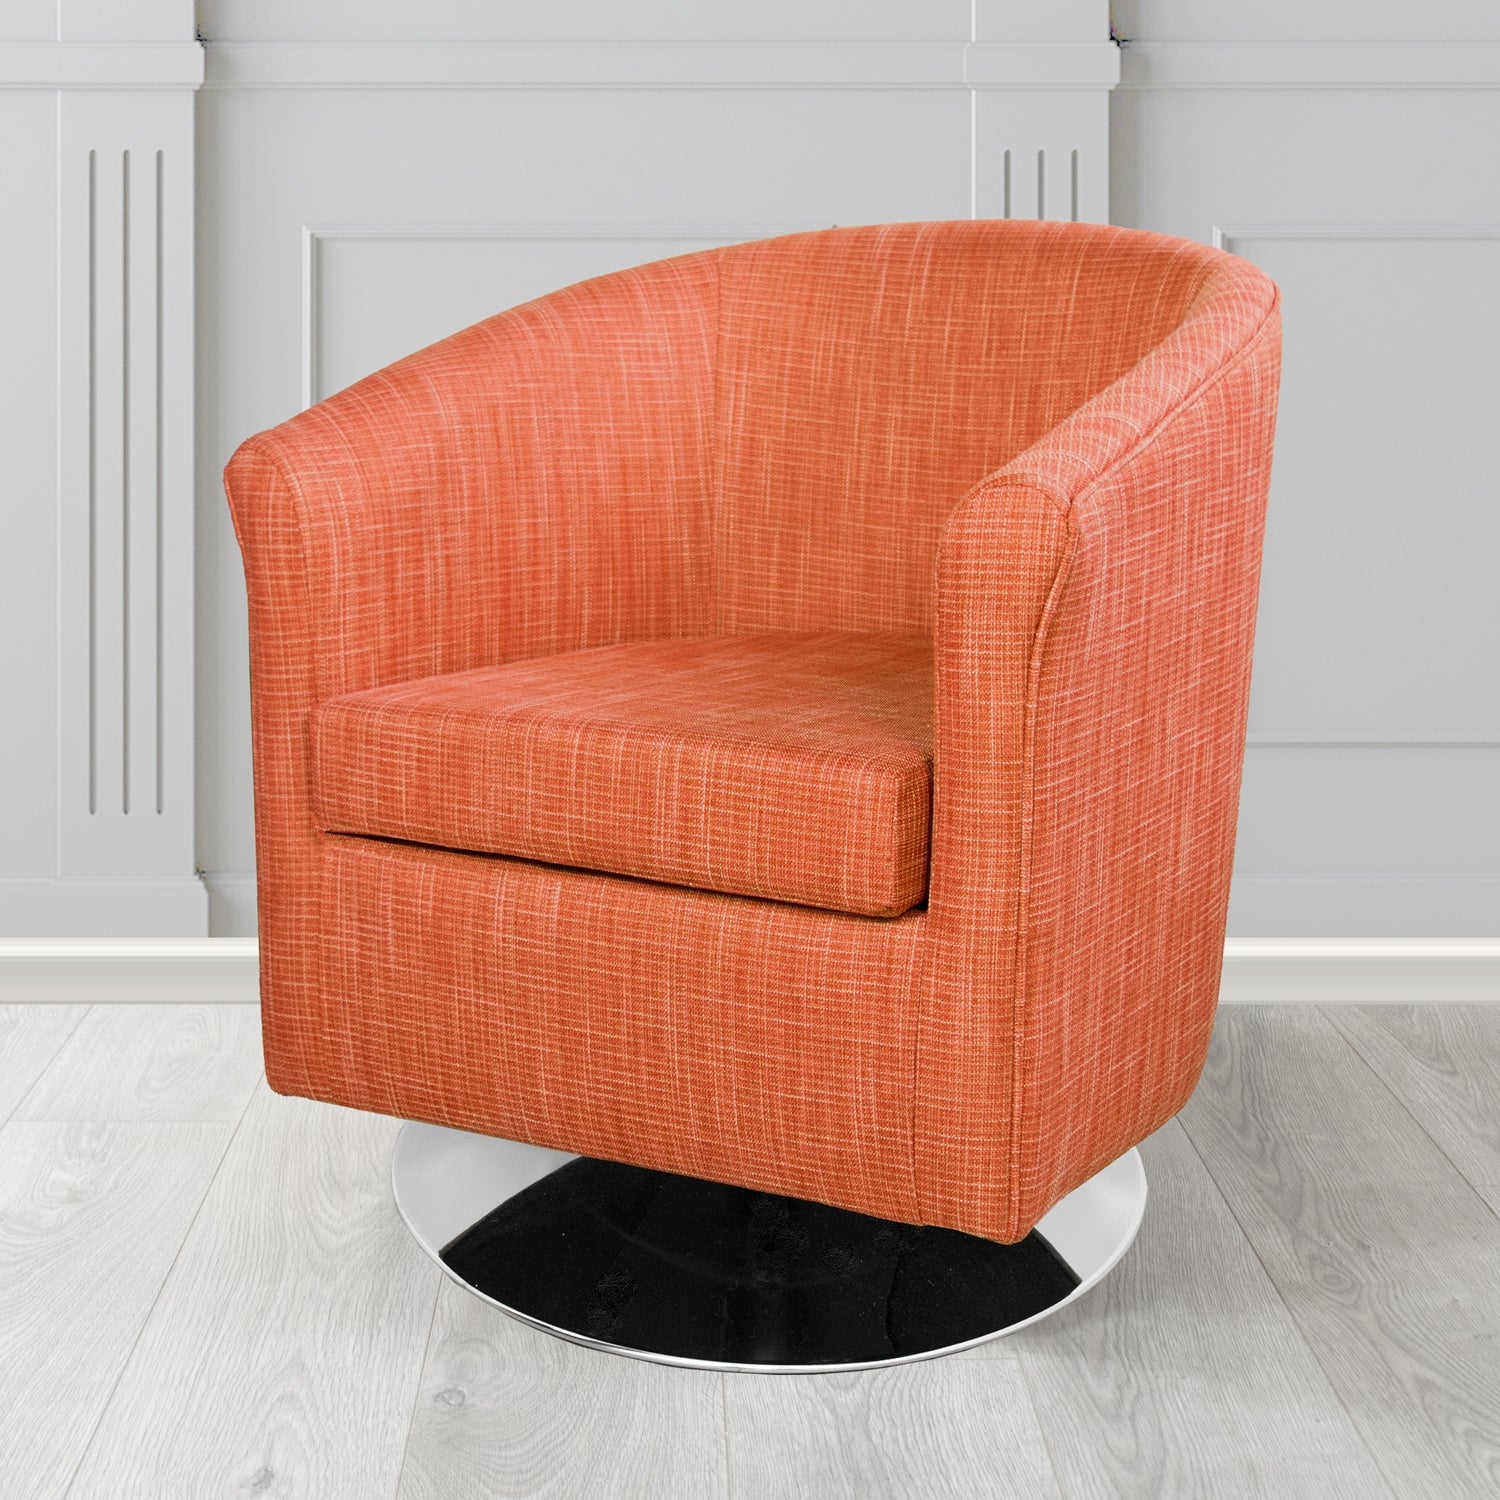 Tuscany Ravel Marmalade Contract Crib 5 Fabric Swivel Tub Chair - Antimicrobial & Water-Resistant - The Tub Chair Shop